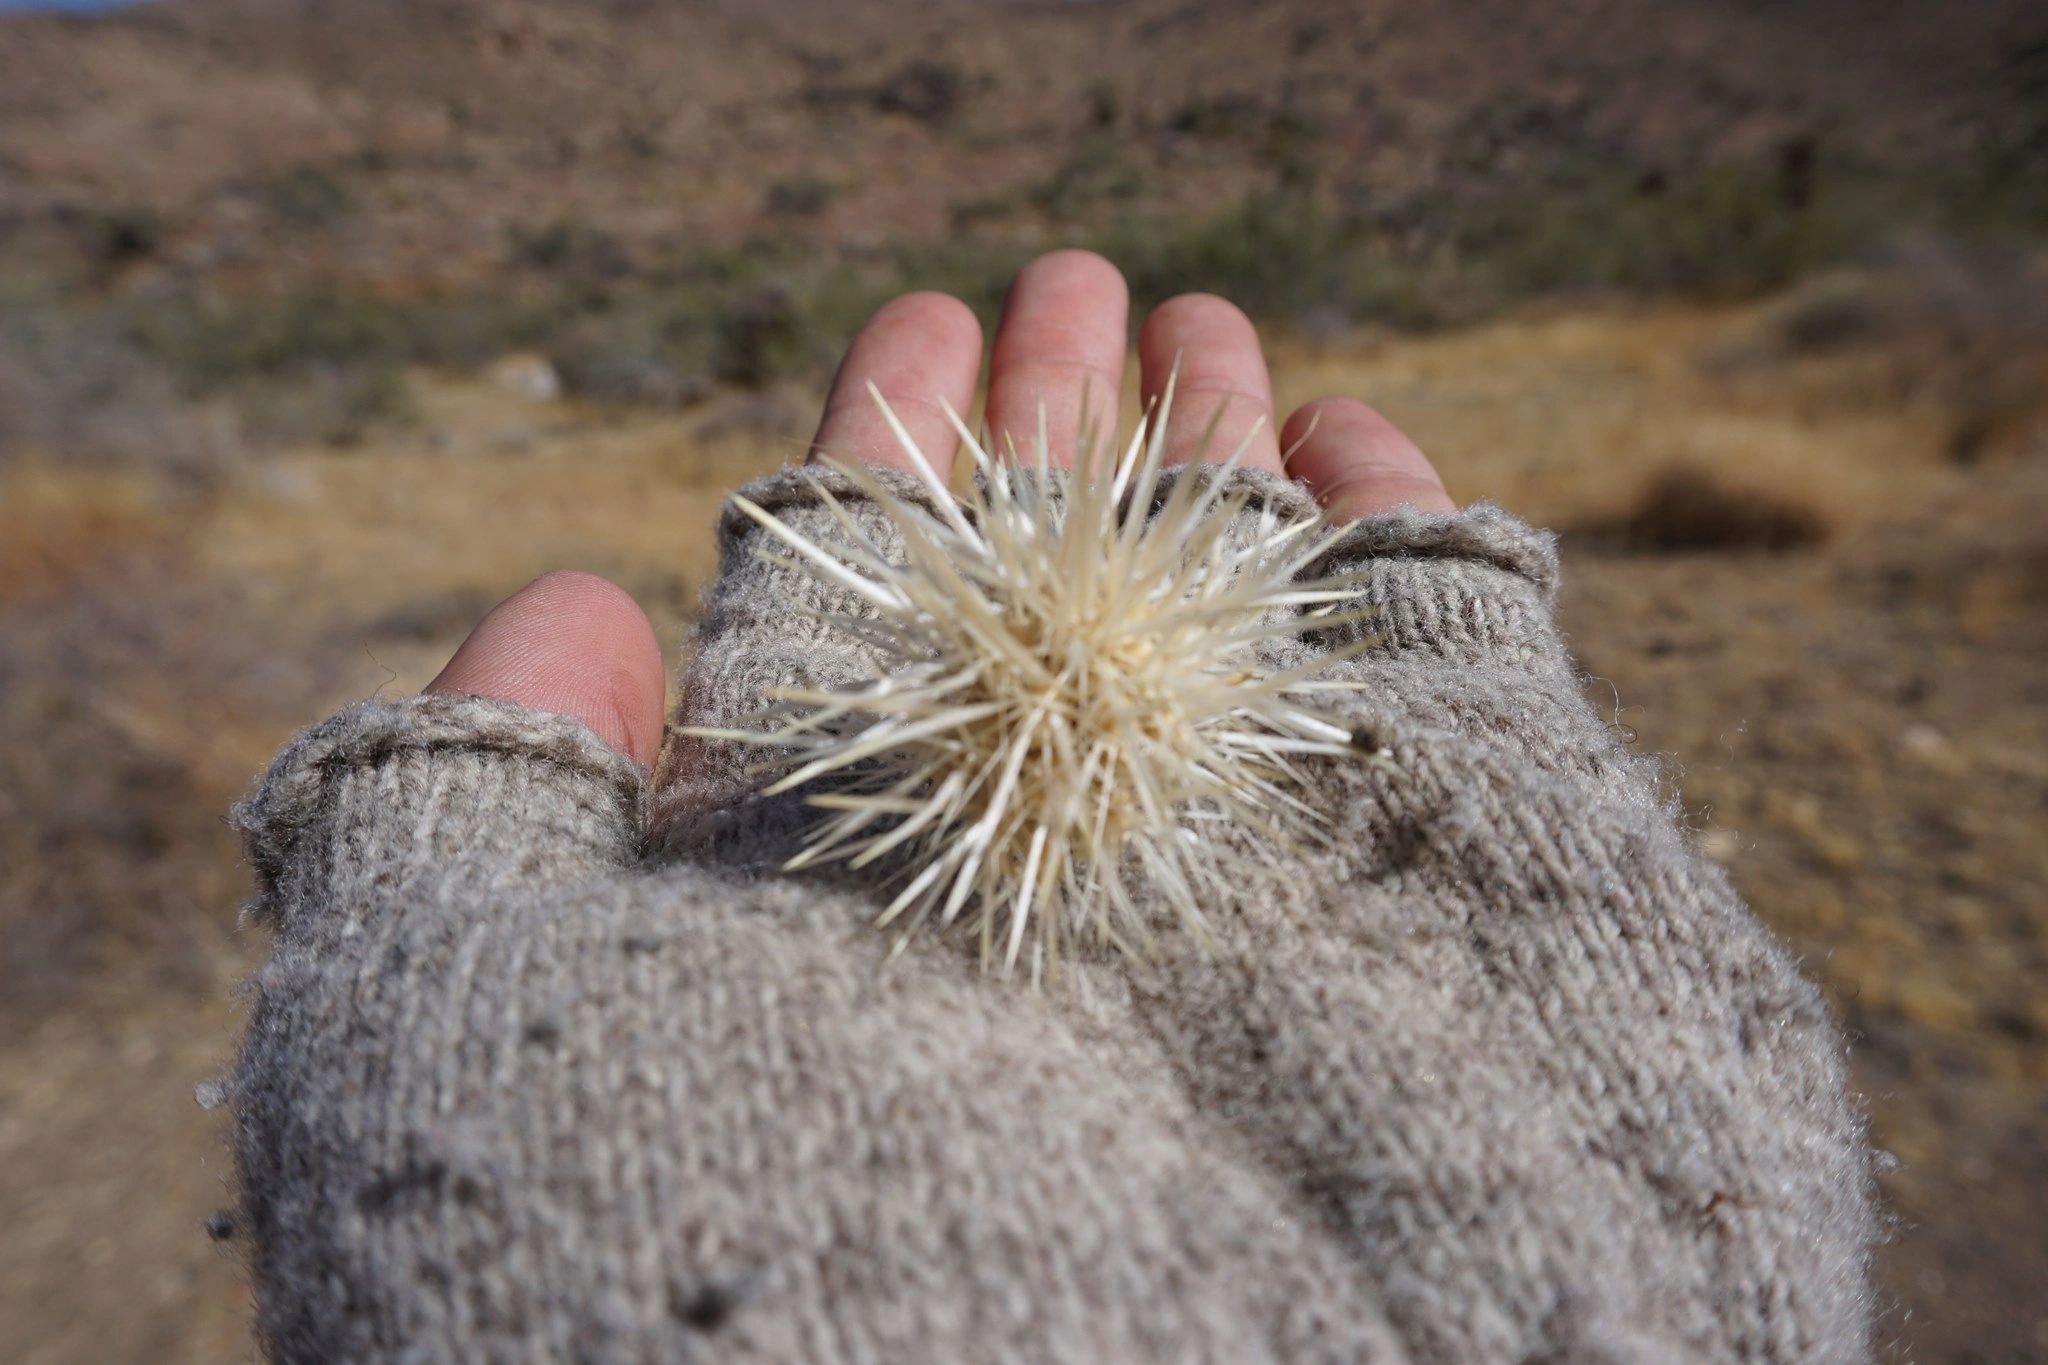 Cholla In Hand: Photo by Charles Adam